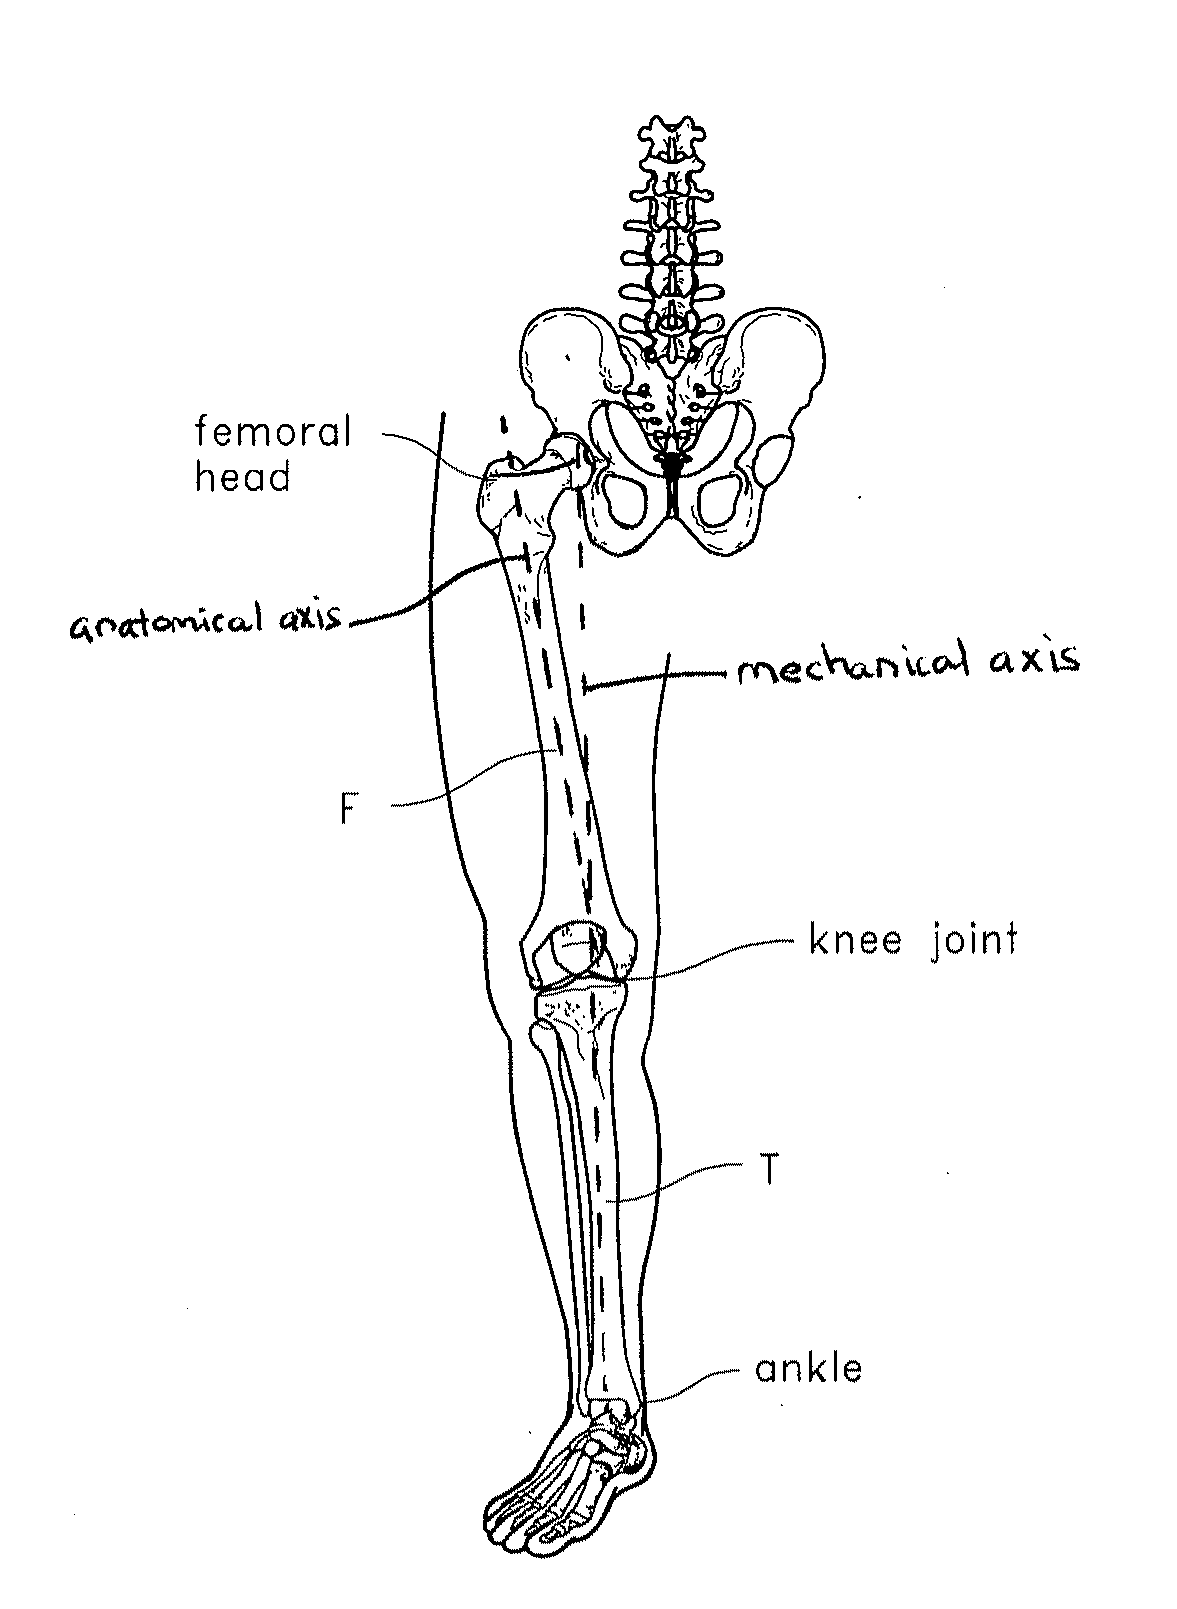 Systems and methods for joint replacement